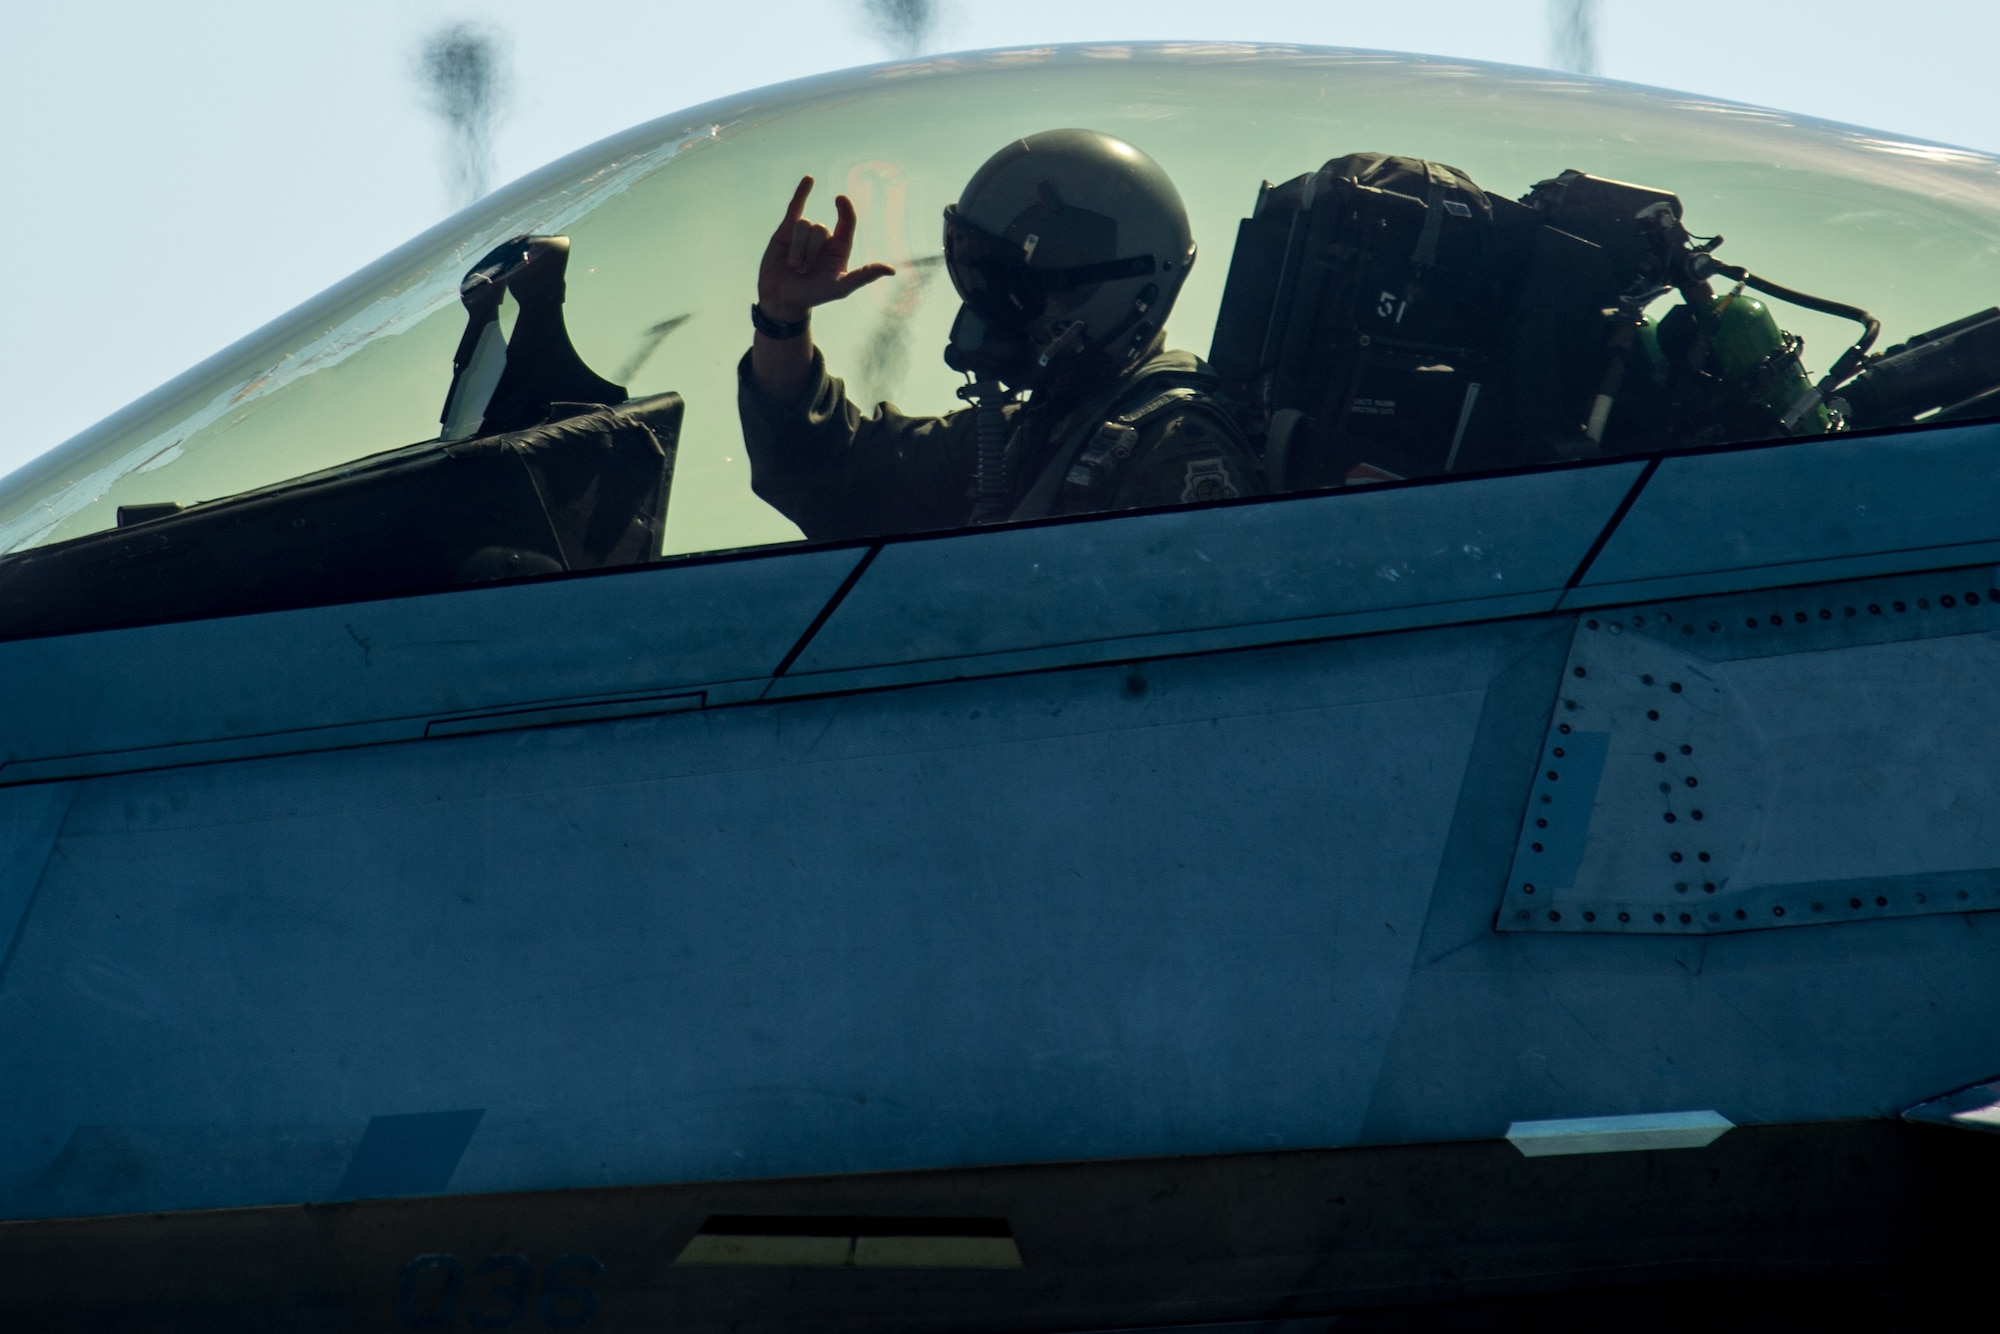 U.S. Air Force F-22 Raptors flown by the 94th and 149th Fighter Squadron pilots take off Oct. 30, 2018 from Tyndall  Air Force Base, Florida. After Hurricane Michael swept the area, multiple major commands have mobilized relief assets in an effort to restore operations after the hurricane caused catastrophic damage to the base. (US Air Force photo by Senior Airman Sean Carnes)